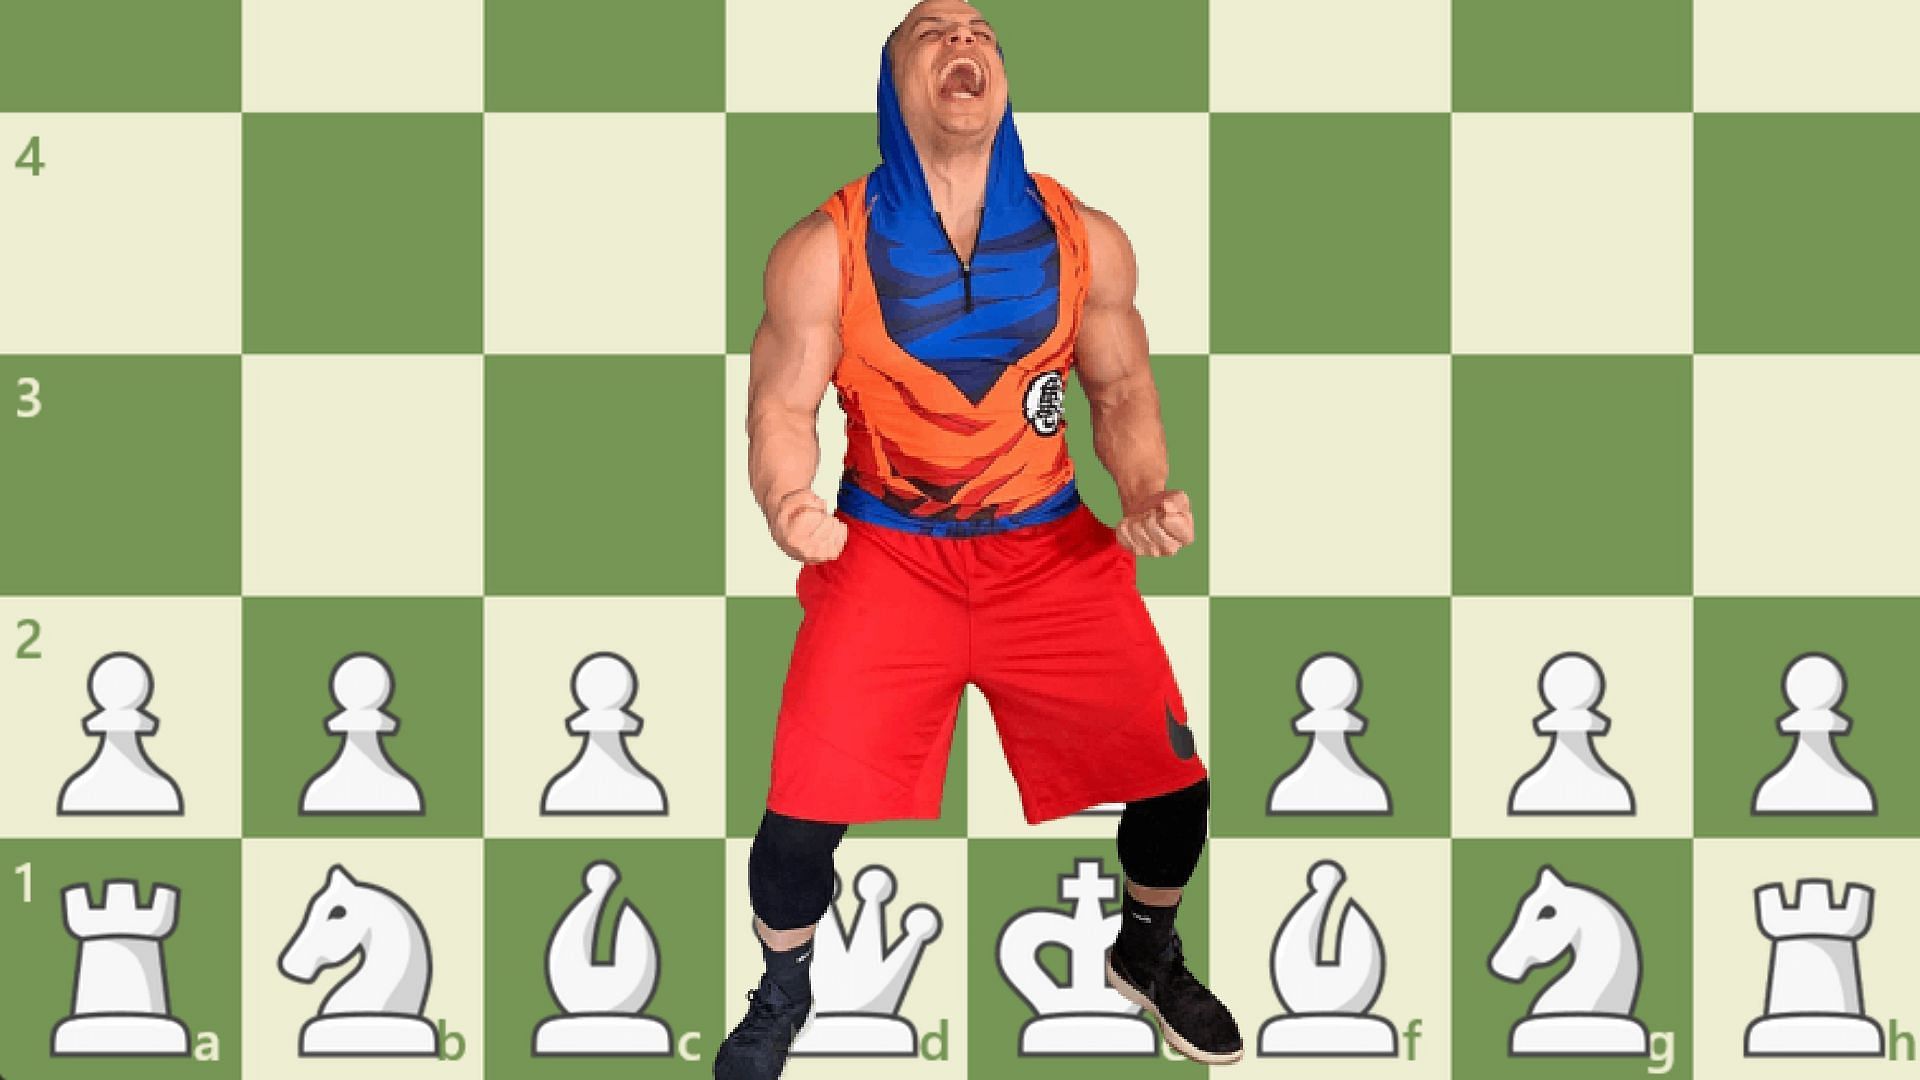 lolTyler1 shook the Twitch community by achieving the remarkable rating on chess.com. (Image via Sportskeeda)